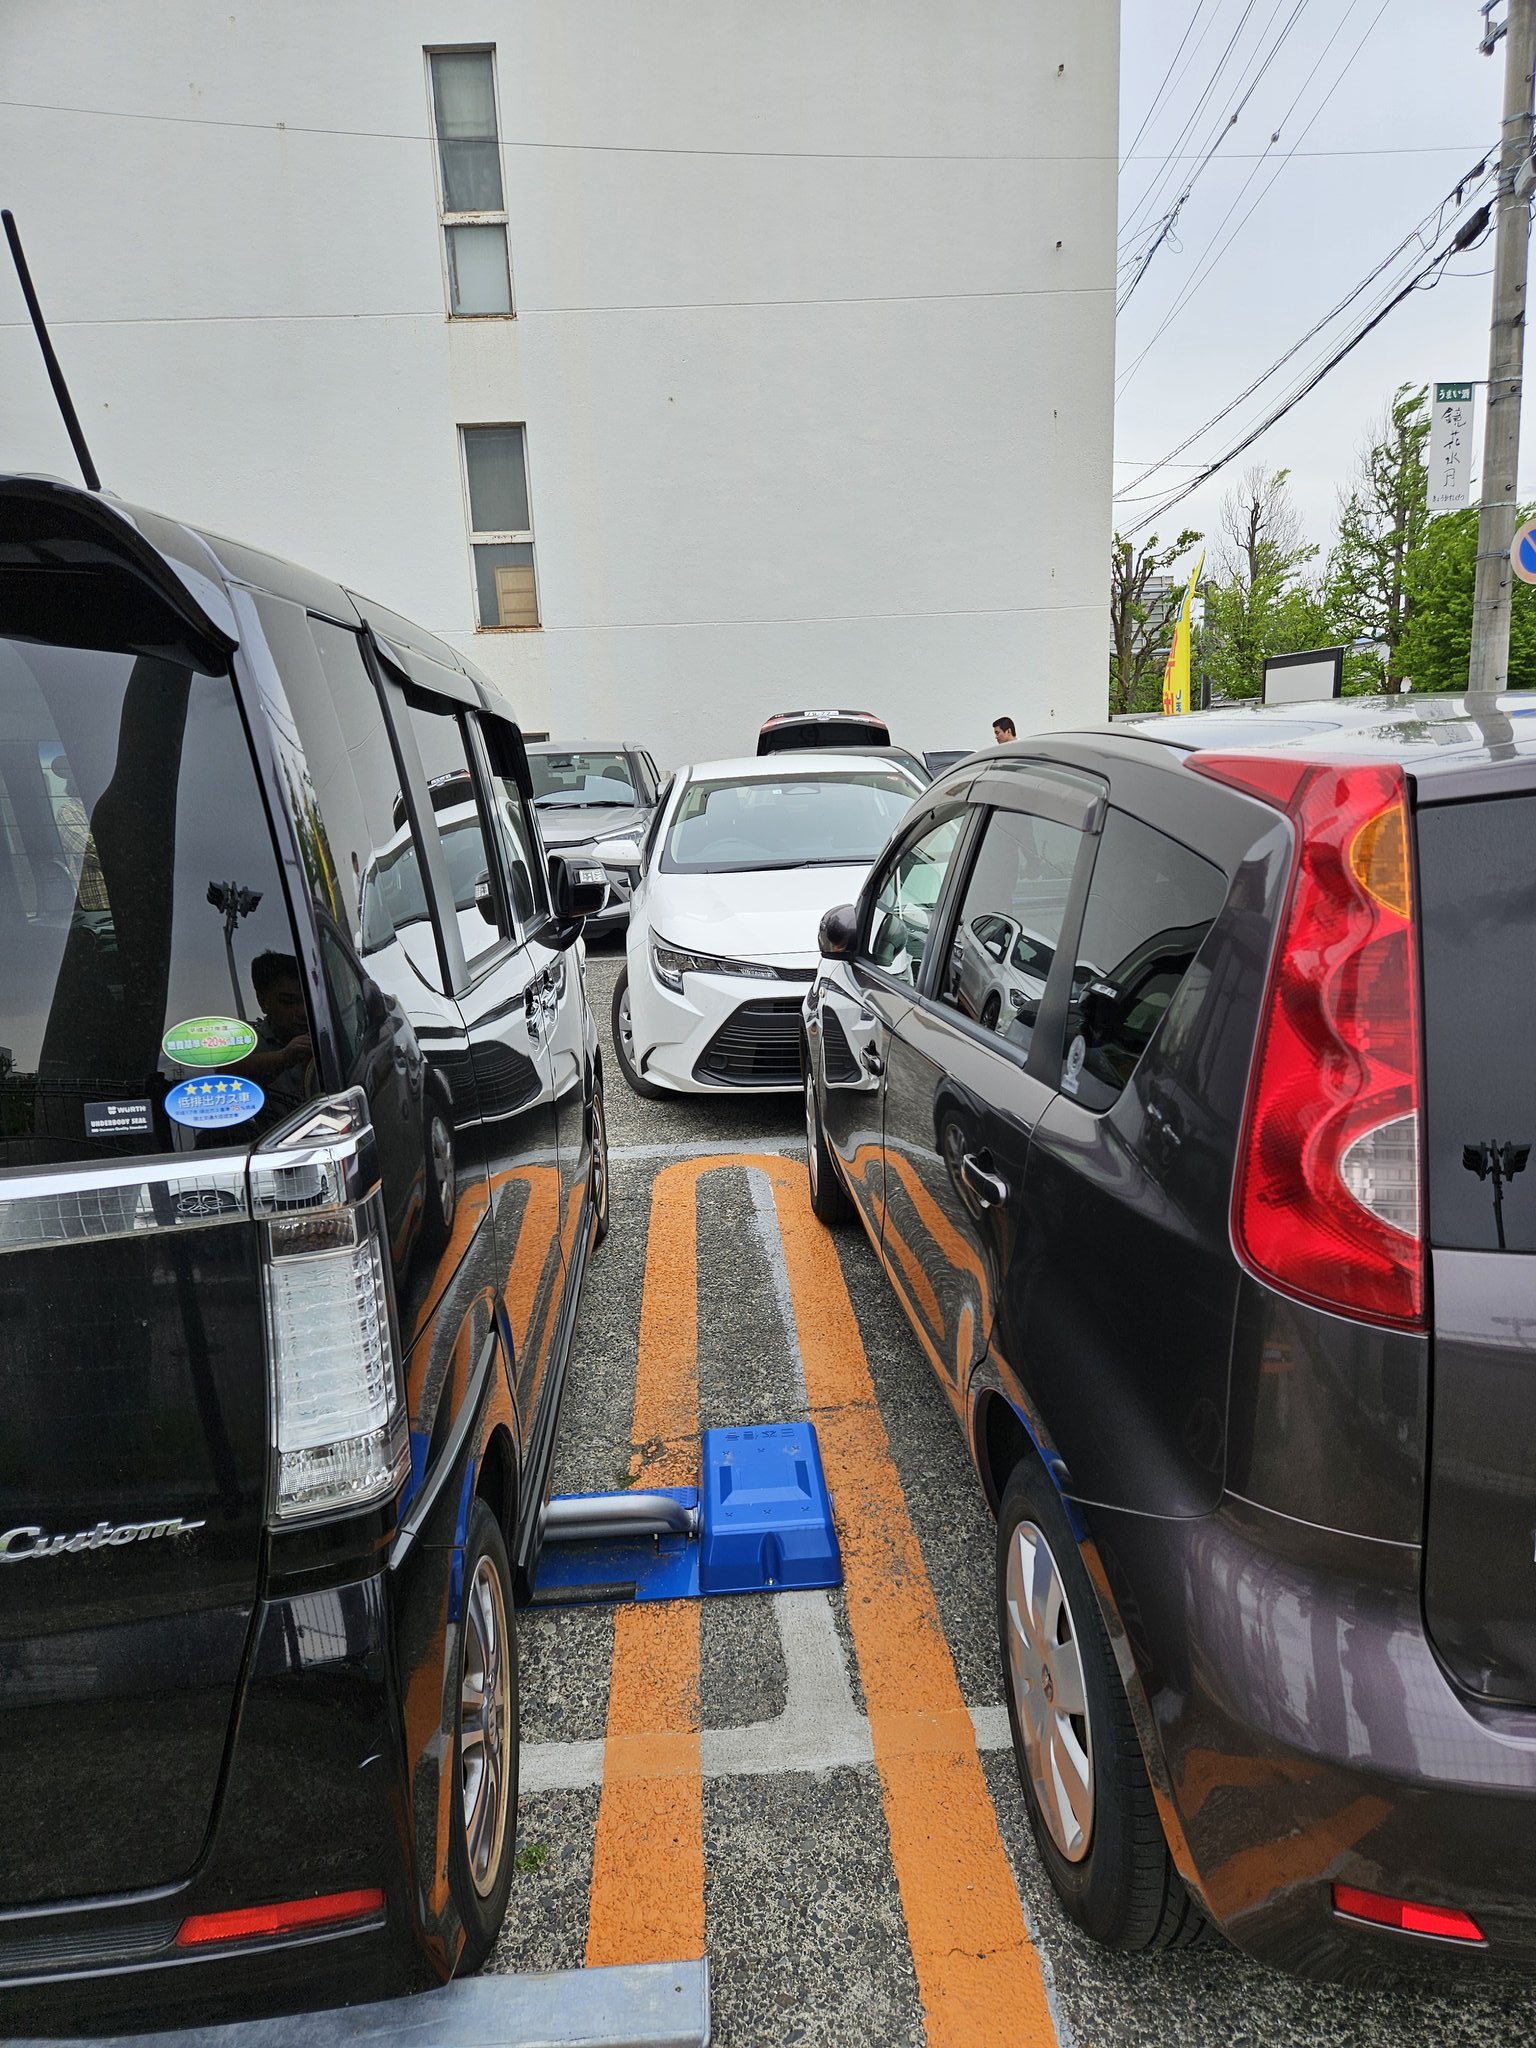 Car double parked by m'sian in japan